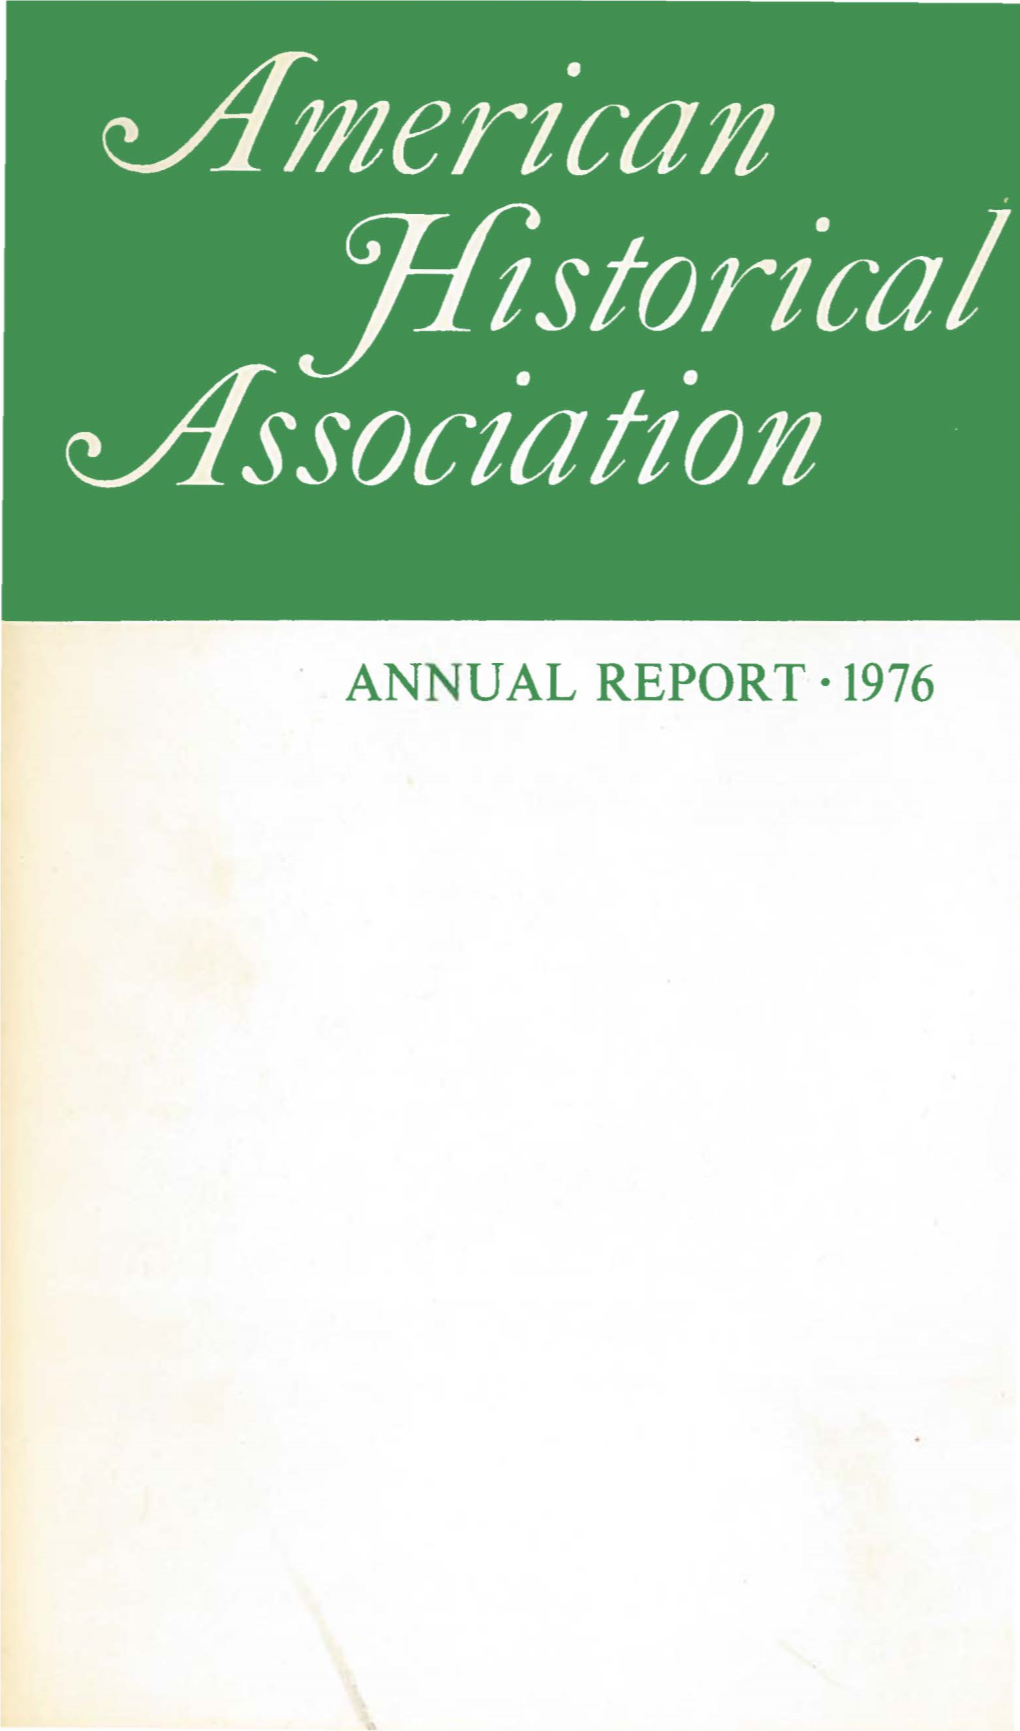 ANNUAL REPORT· 1976 American Historical Association